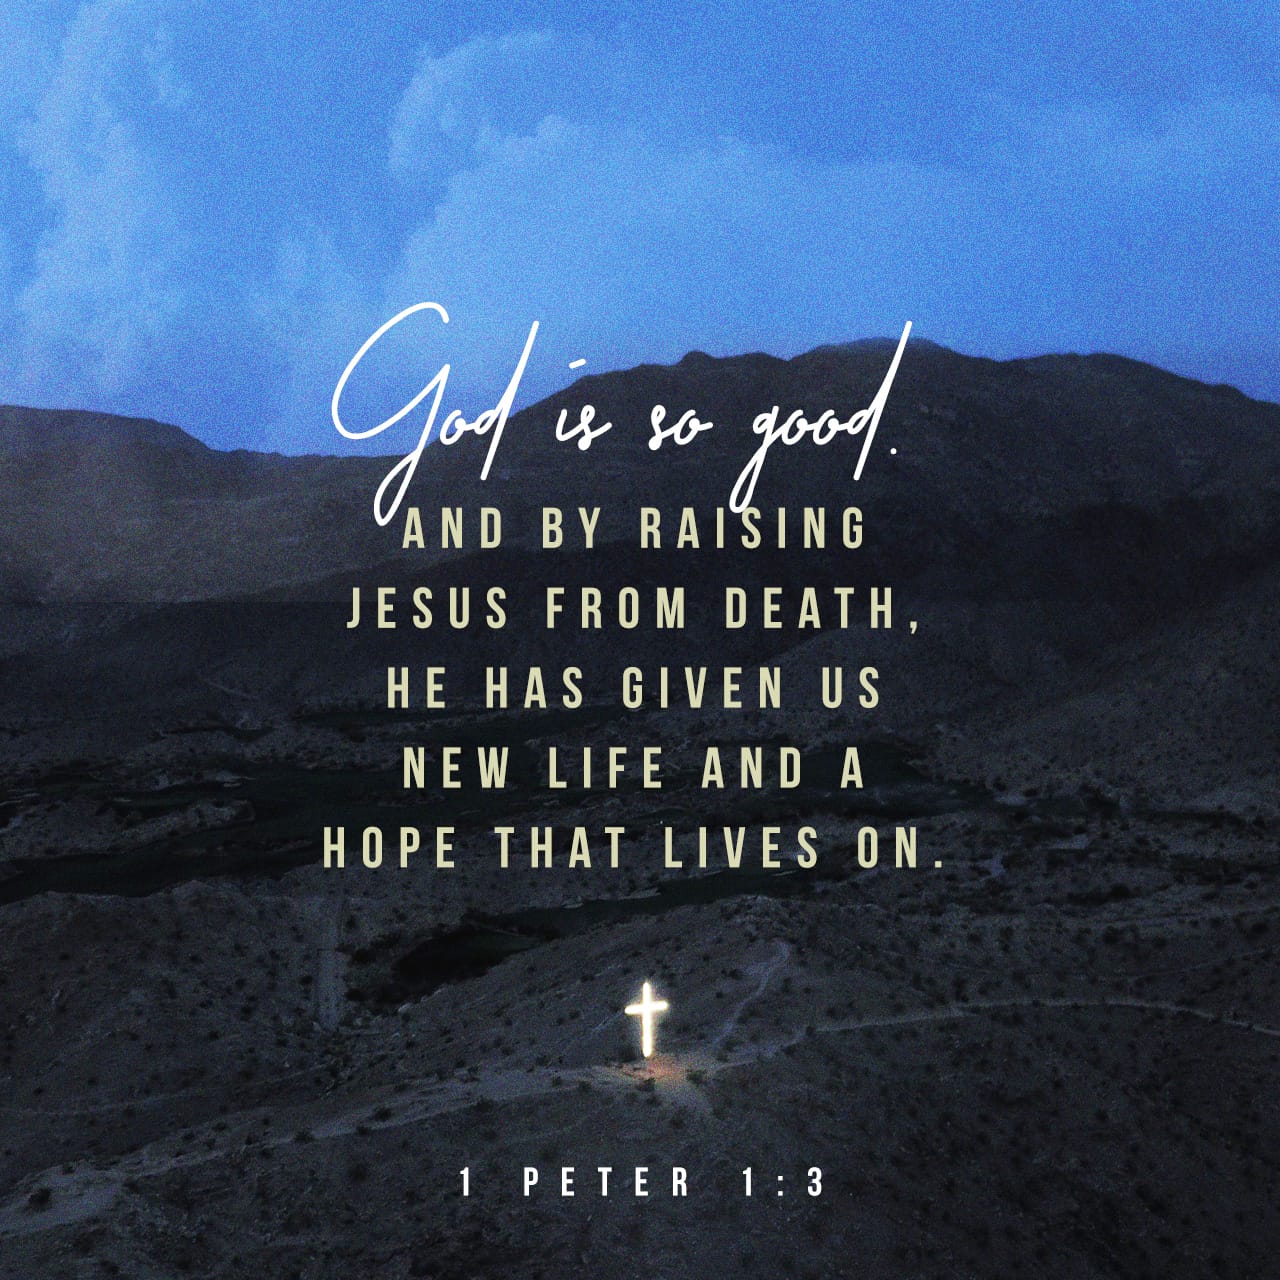 1 Peter 1:3 Blessed be the God and Father of our Lord Jesus Christ, which according to his abundant mercy hath begotten us again unto a lively hope by the resurrection of Jesus Christ from the dead | King James Version (KJV) | Download The Bible App Now